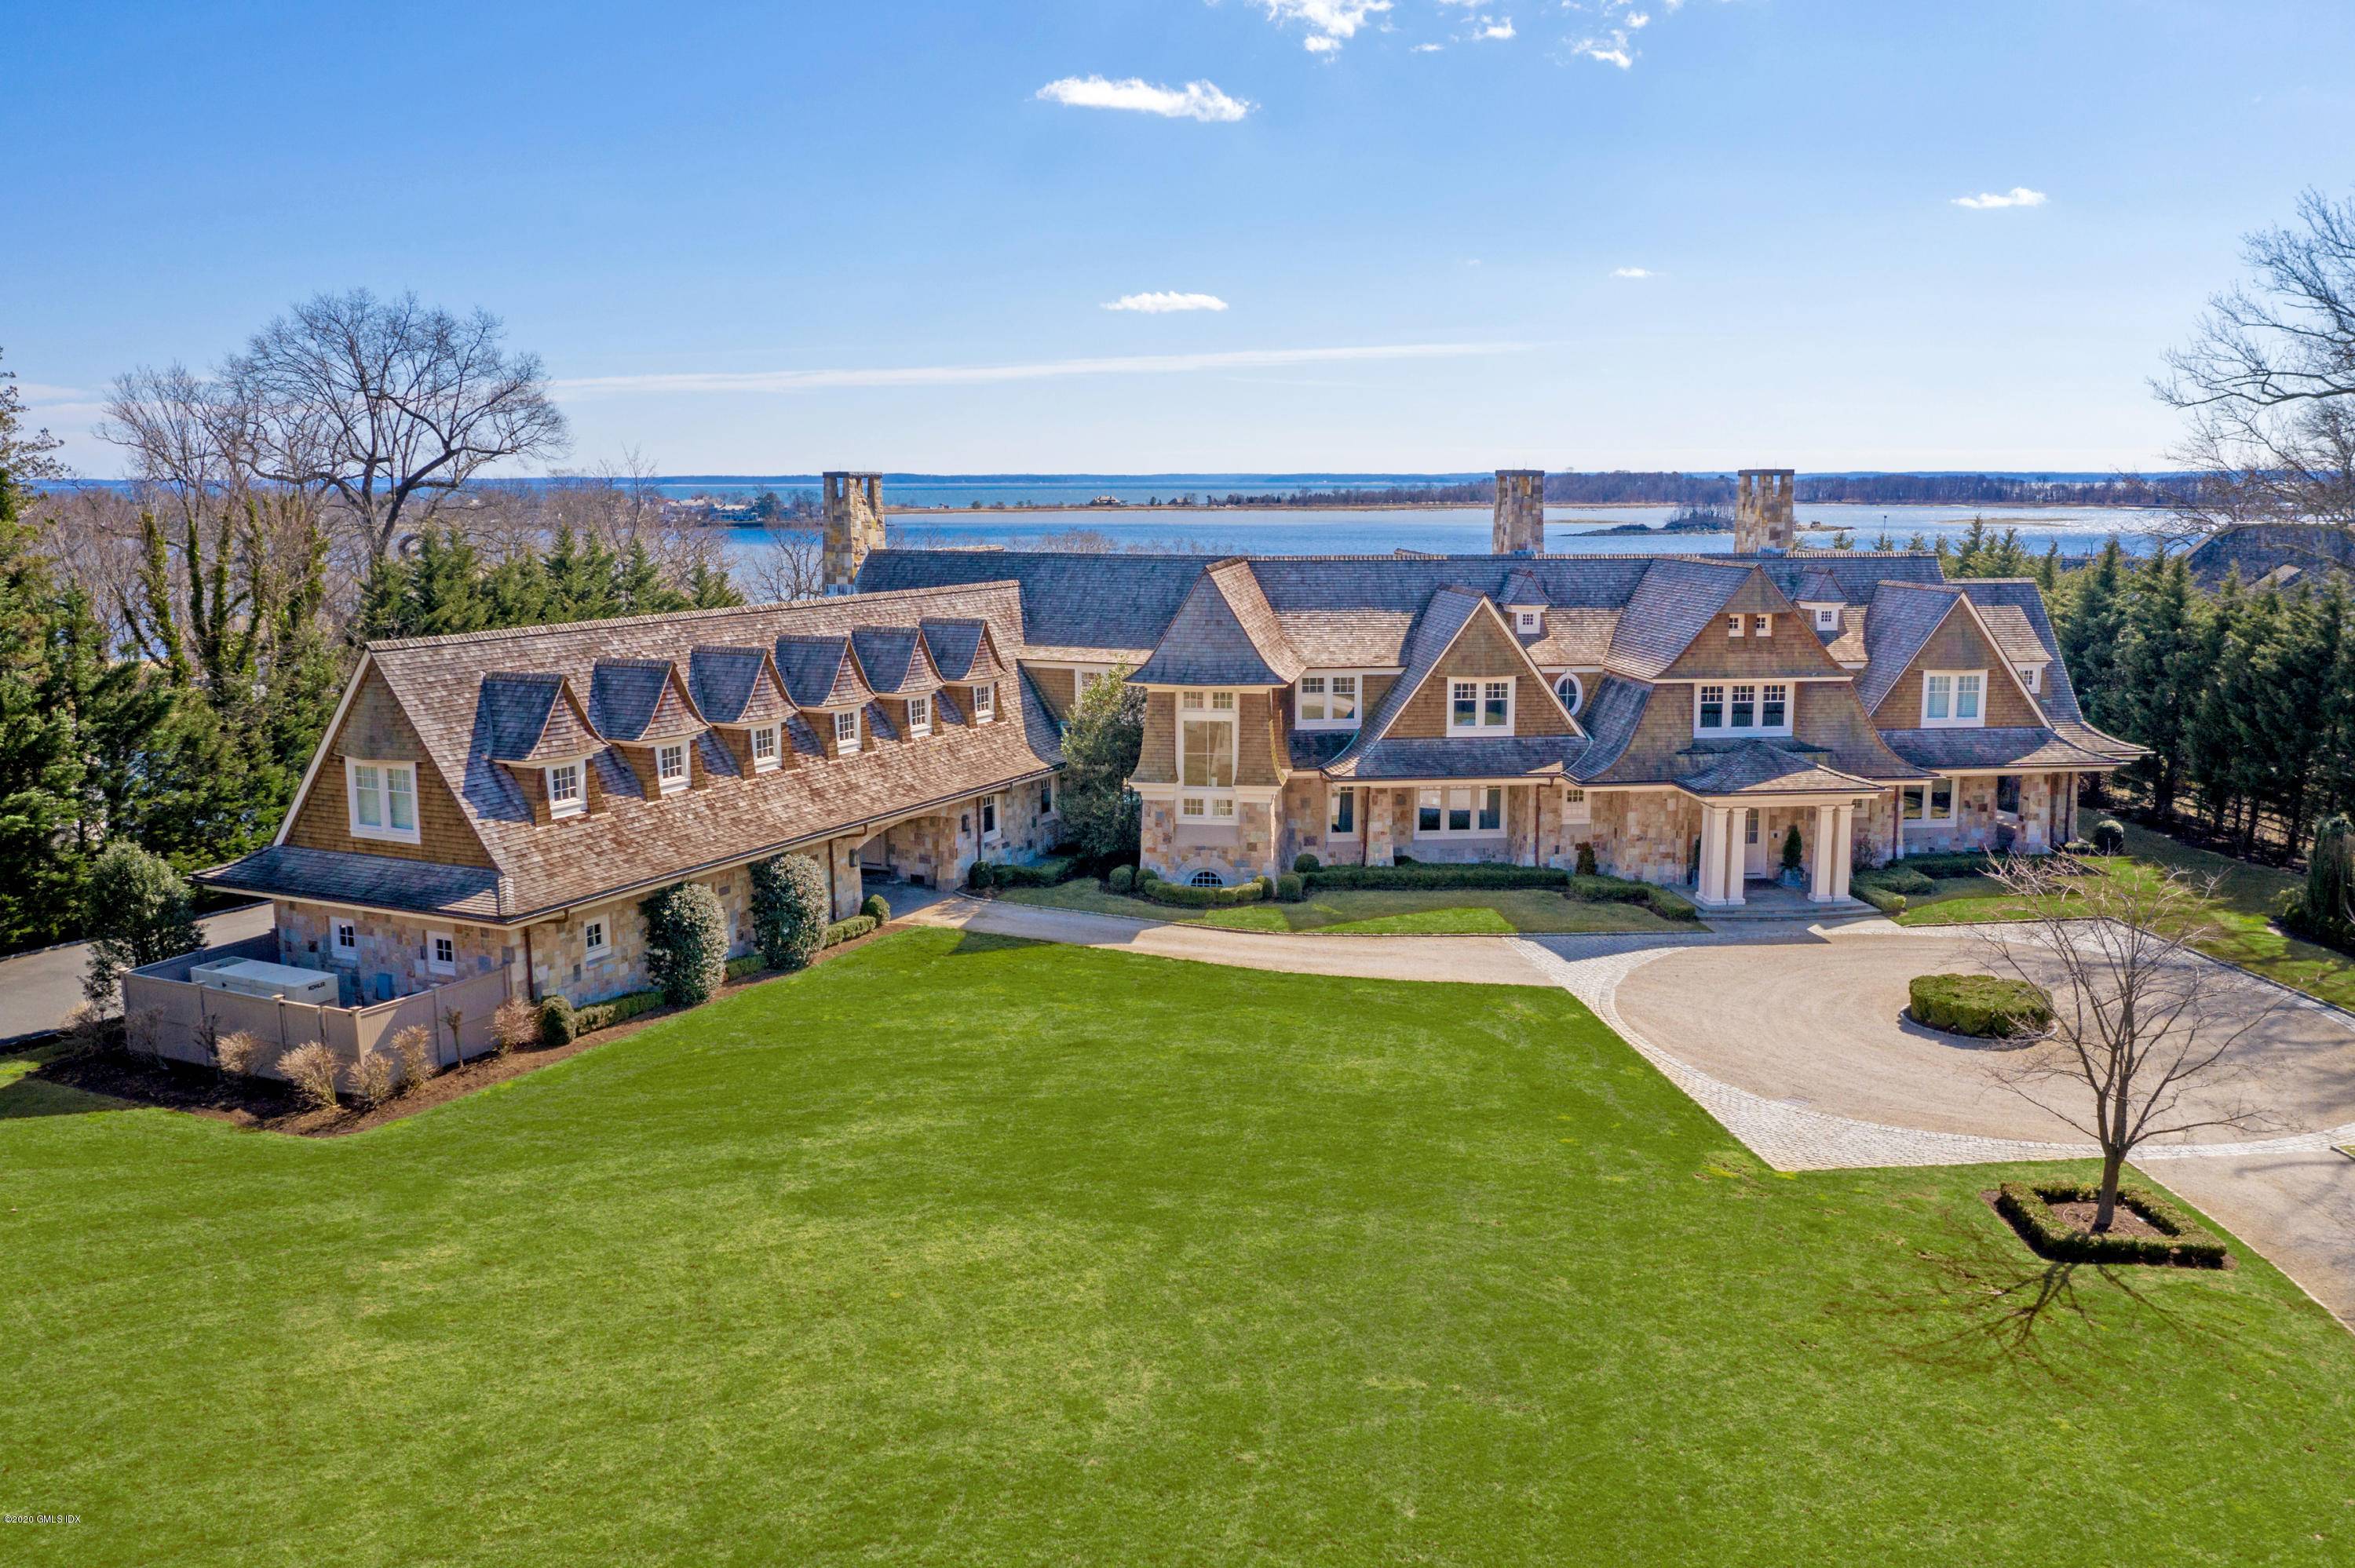 Unparalleled water views from nearly every room in this timeless Shope Reno Wharton shingle and stone waterfront masterpiece with a commanding presence at the end of the revered Meadow Road.